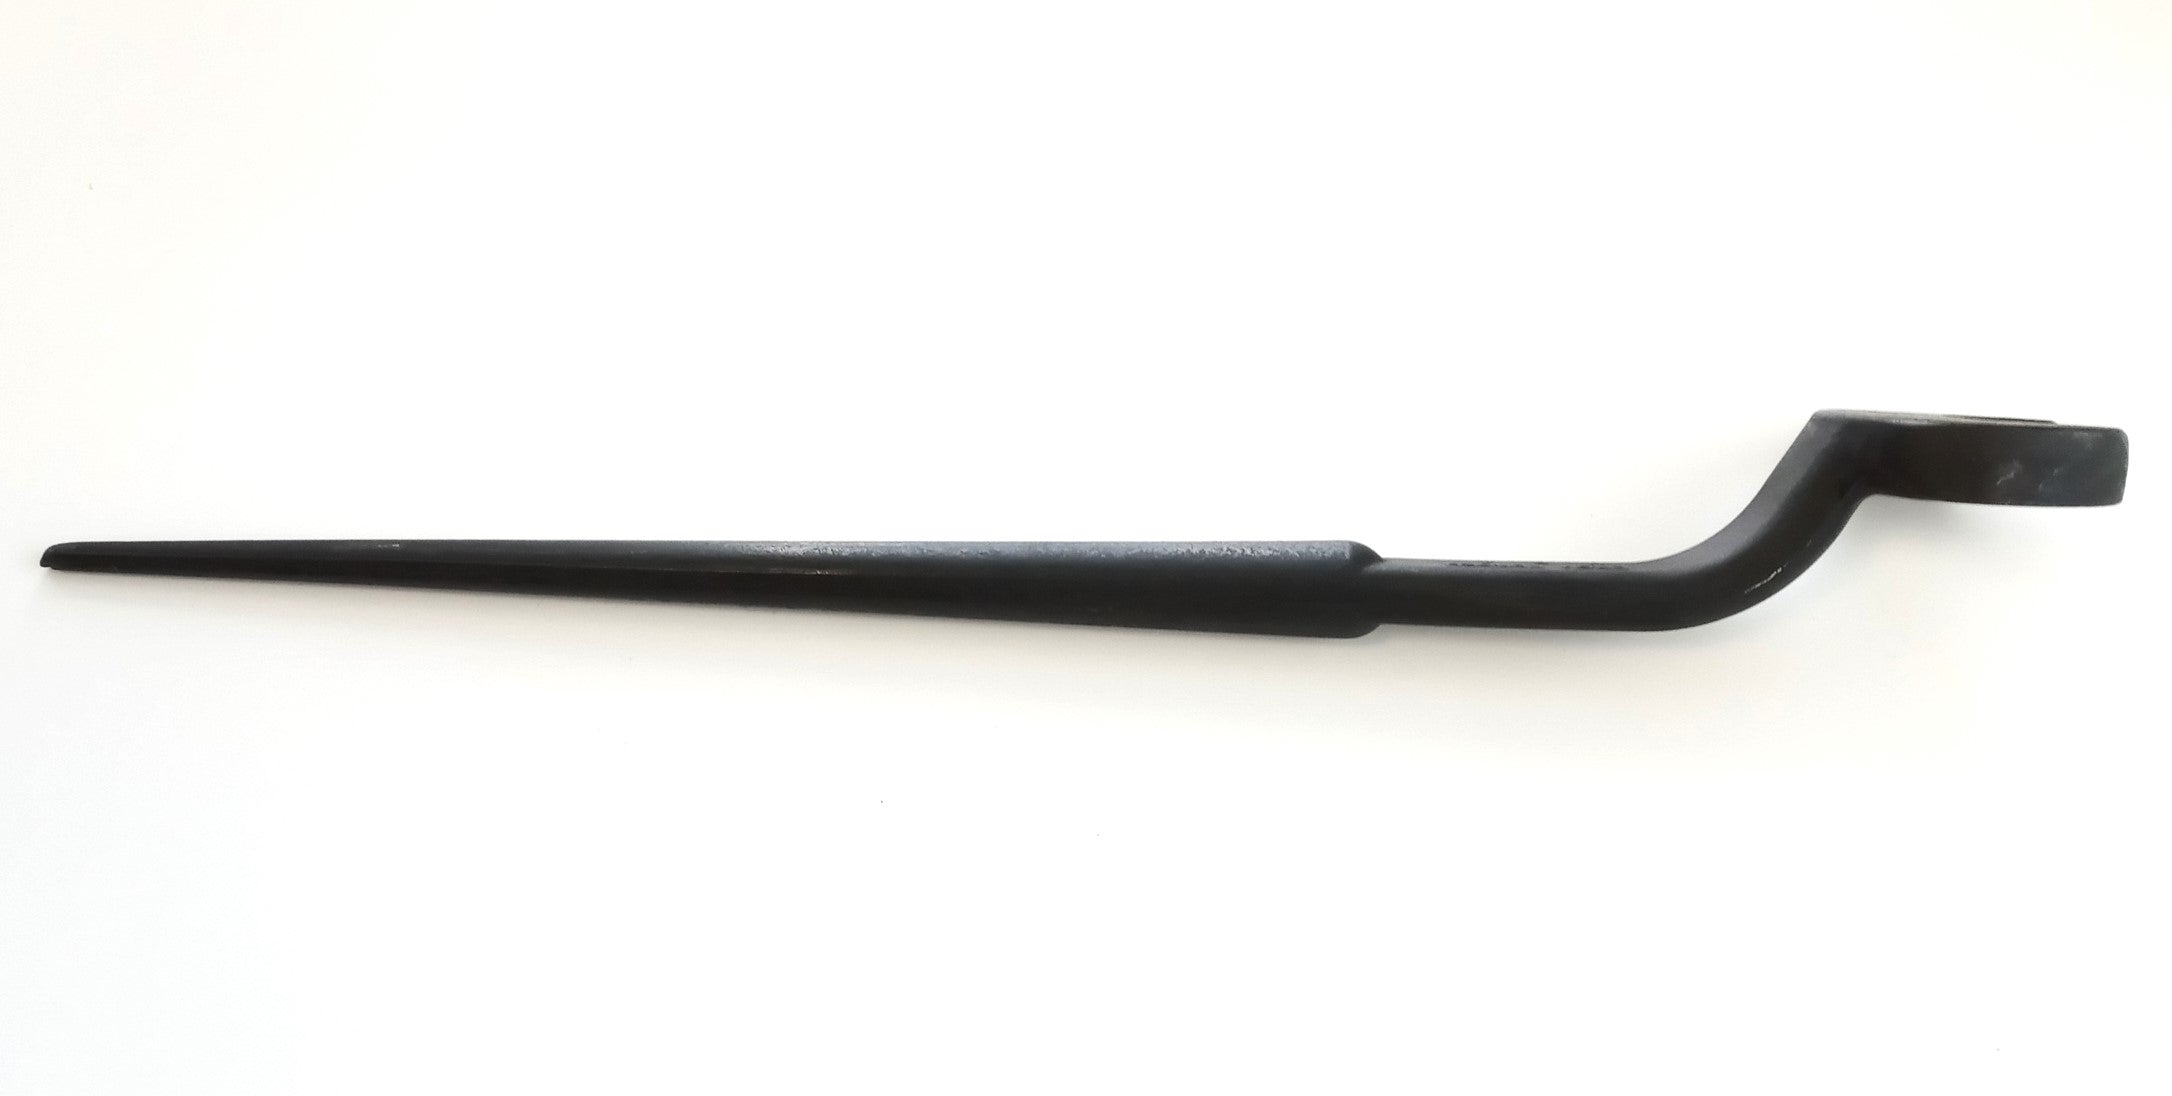 Armstrong 32-540 1-1/4" Black Oxide Open End Black Oxide Structural Wrench USA